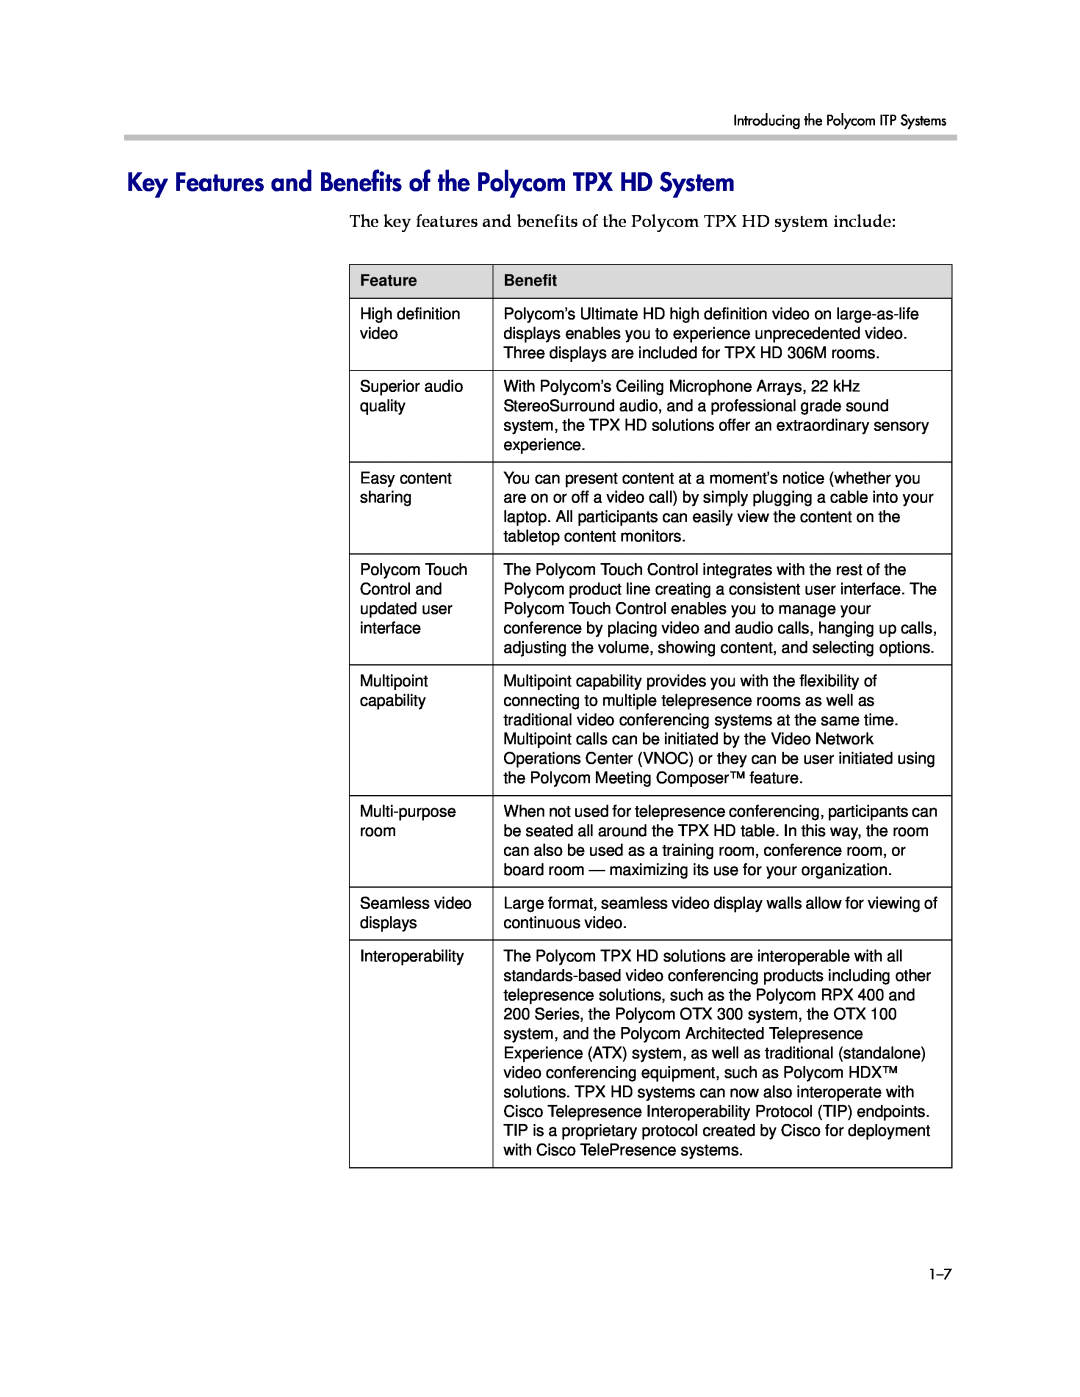 Polycom 3725-63211-002, A manual Key Features and Benefits of the Polycom TPX HD System 